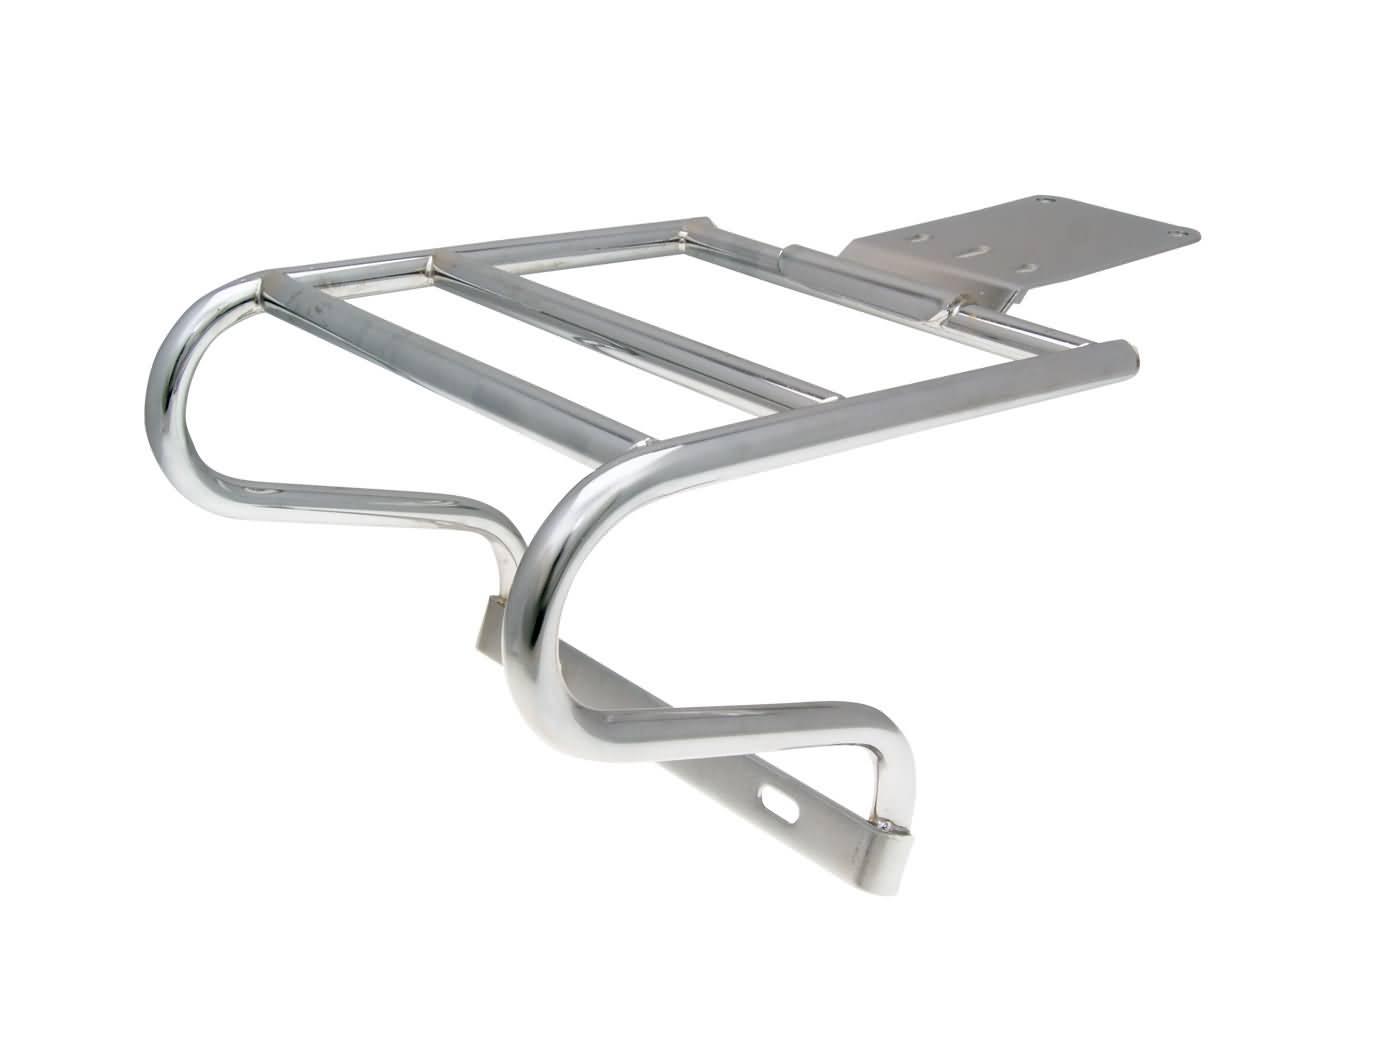 Rear Luggage Rack / Top Box Carrier For Vespa PX, LML